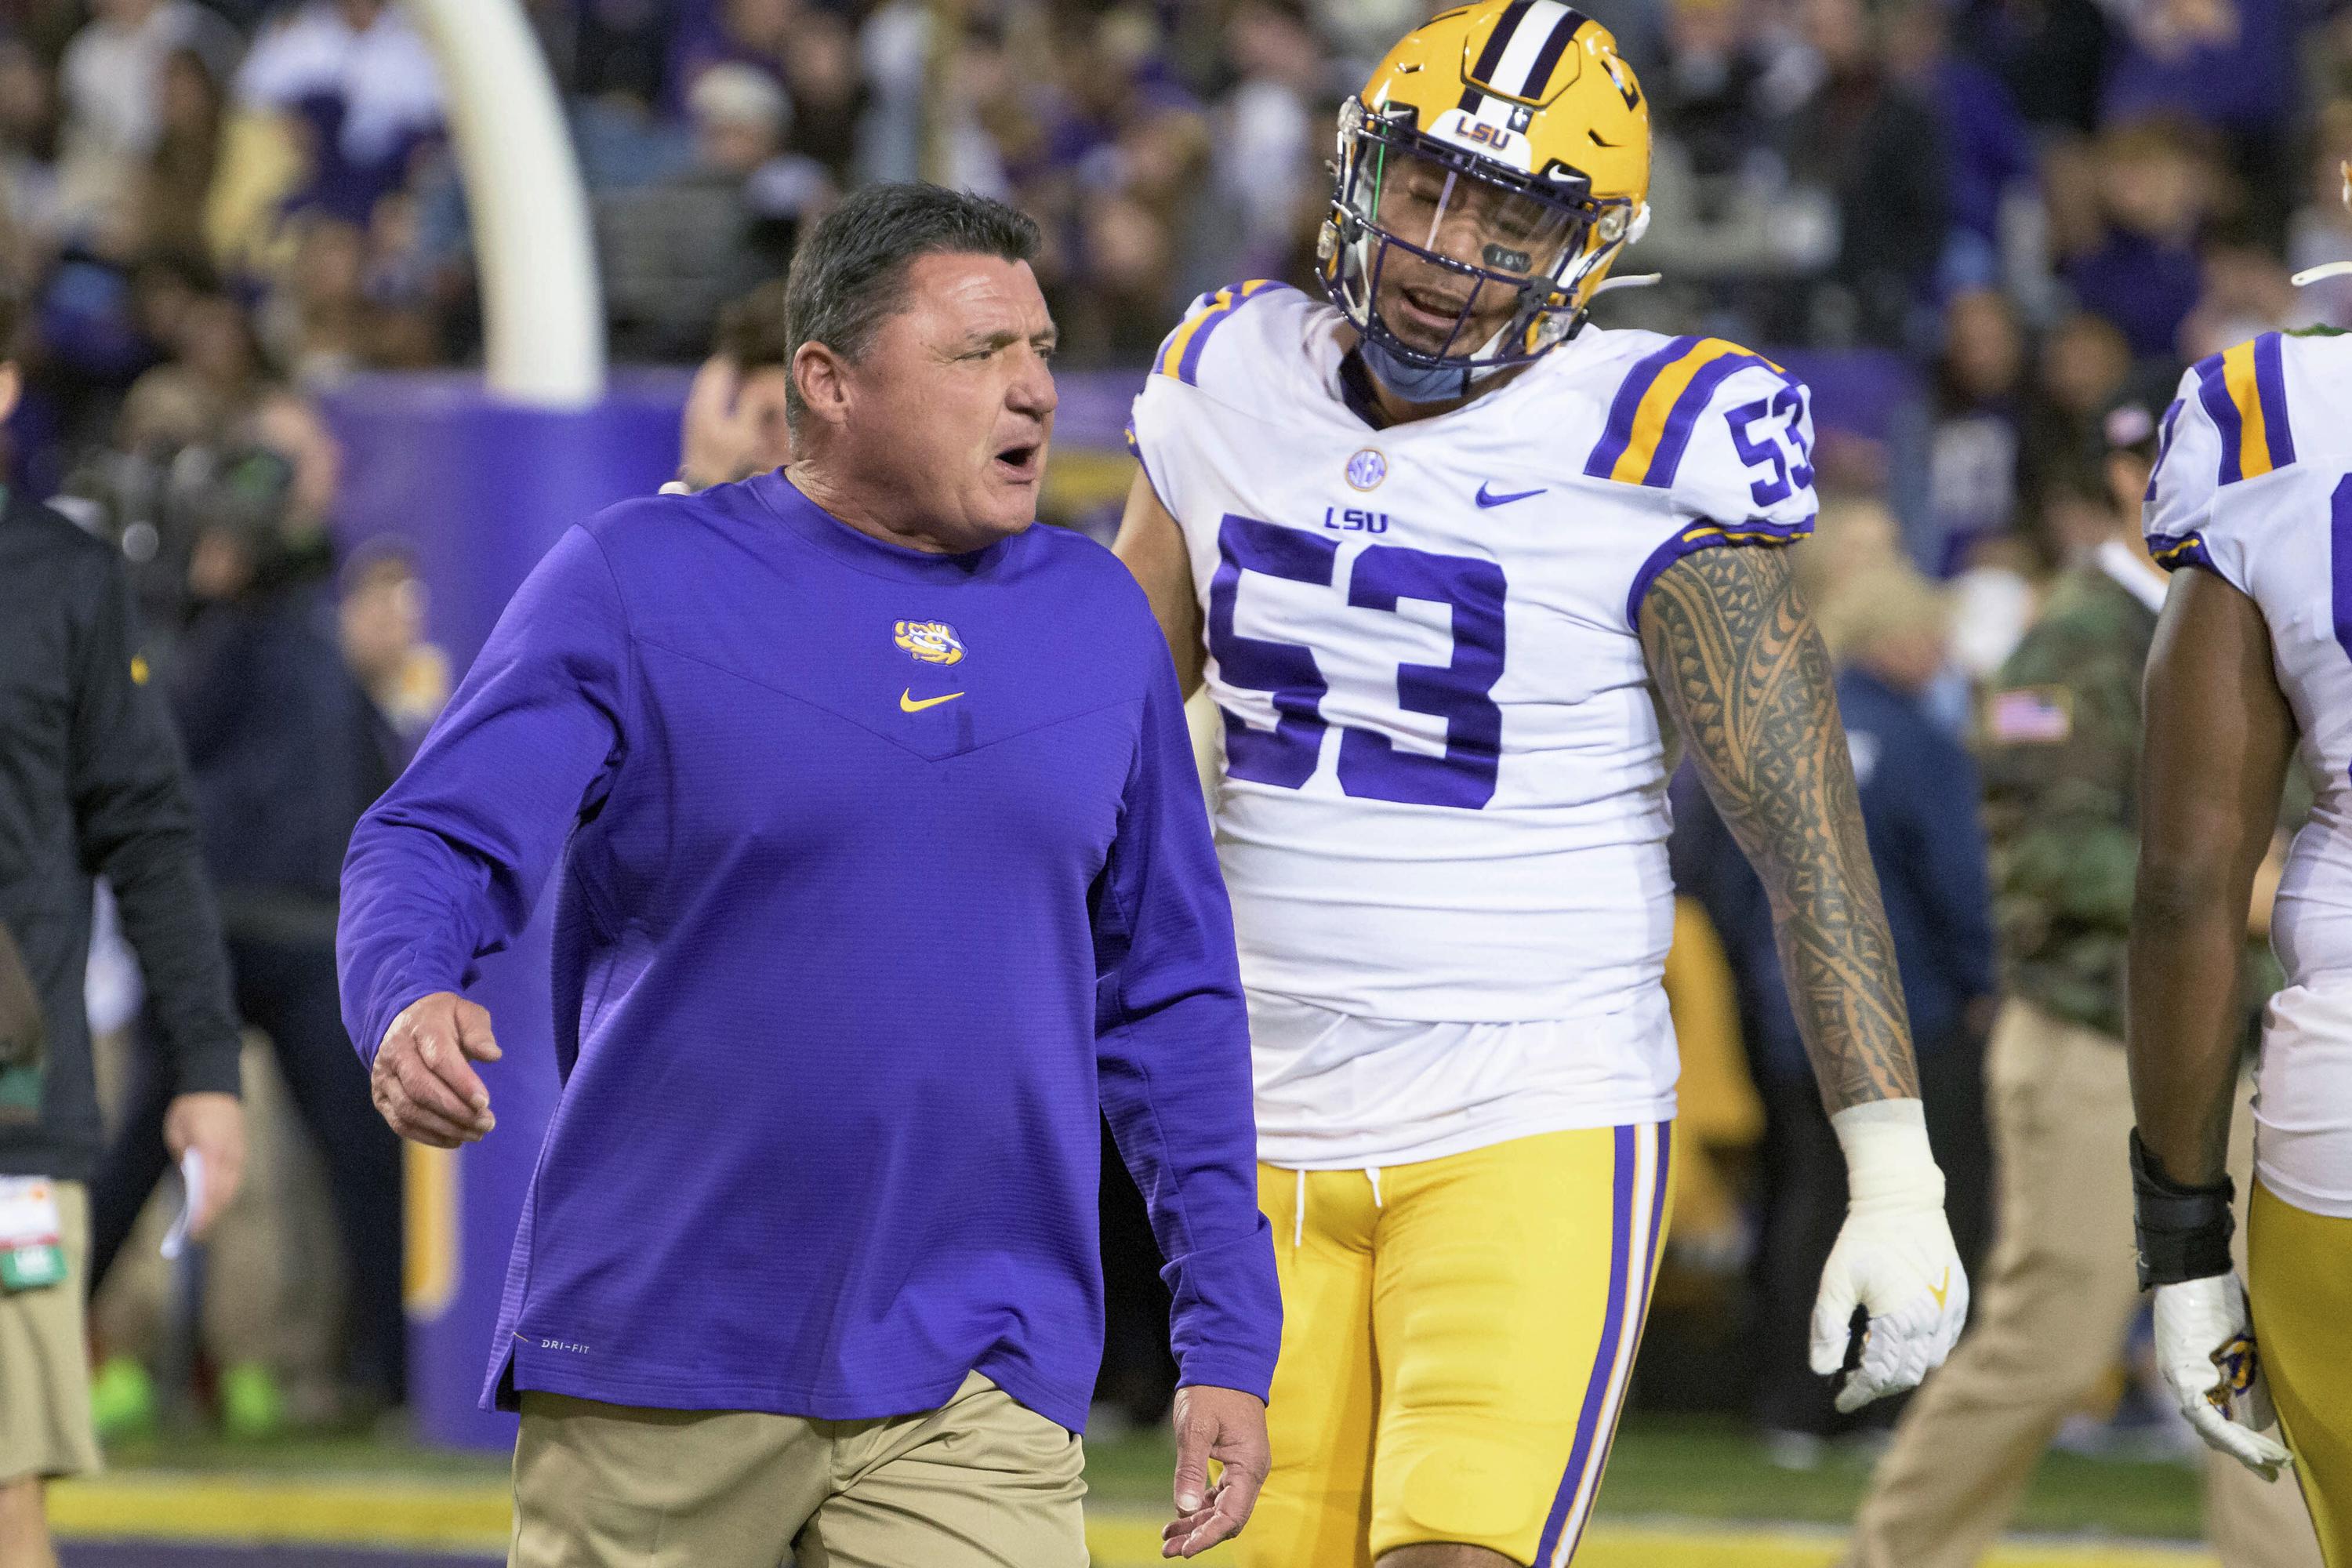 LSU hosts ULM with bowl eligibility at stake for both teams | AP News